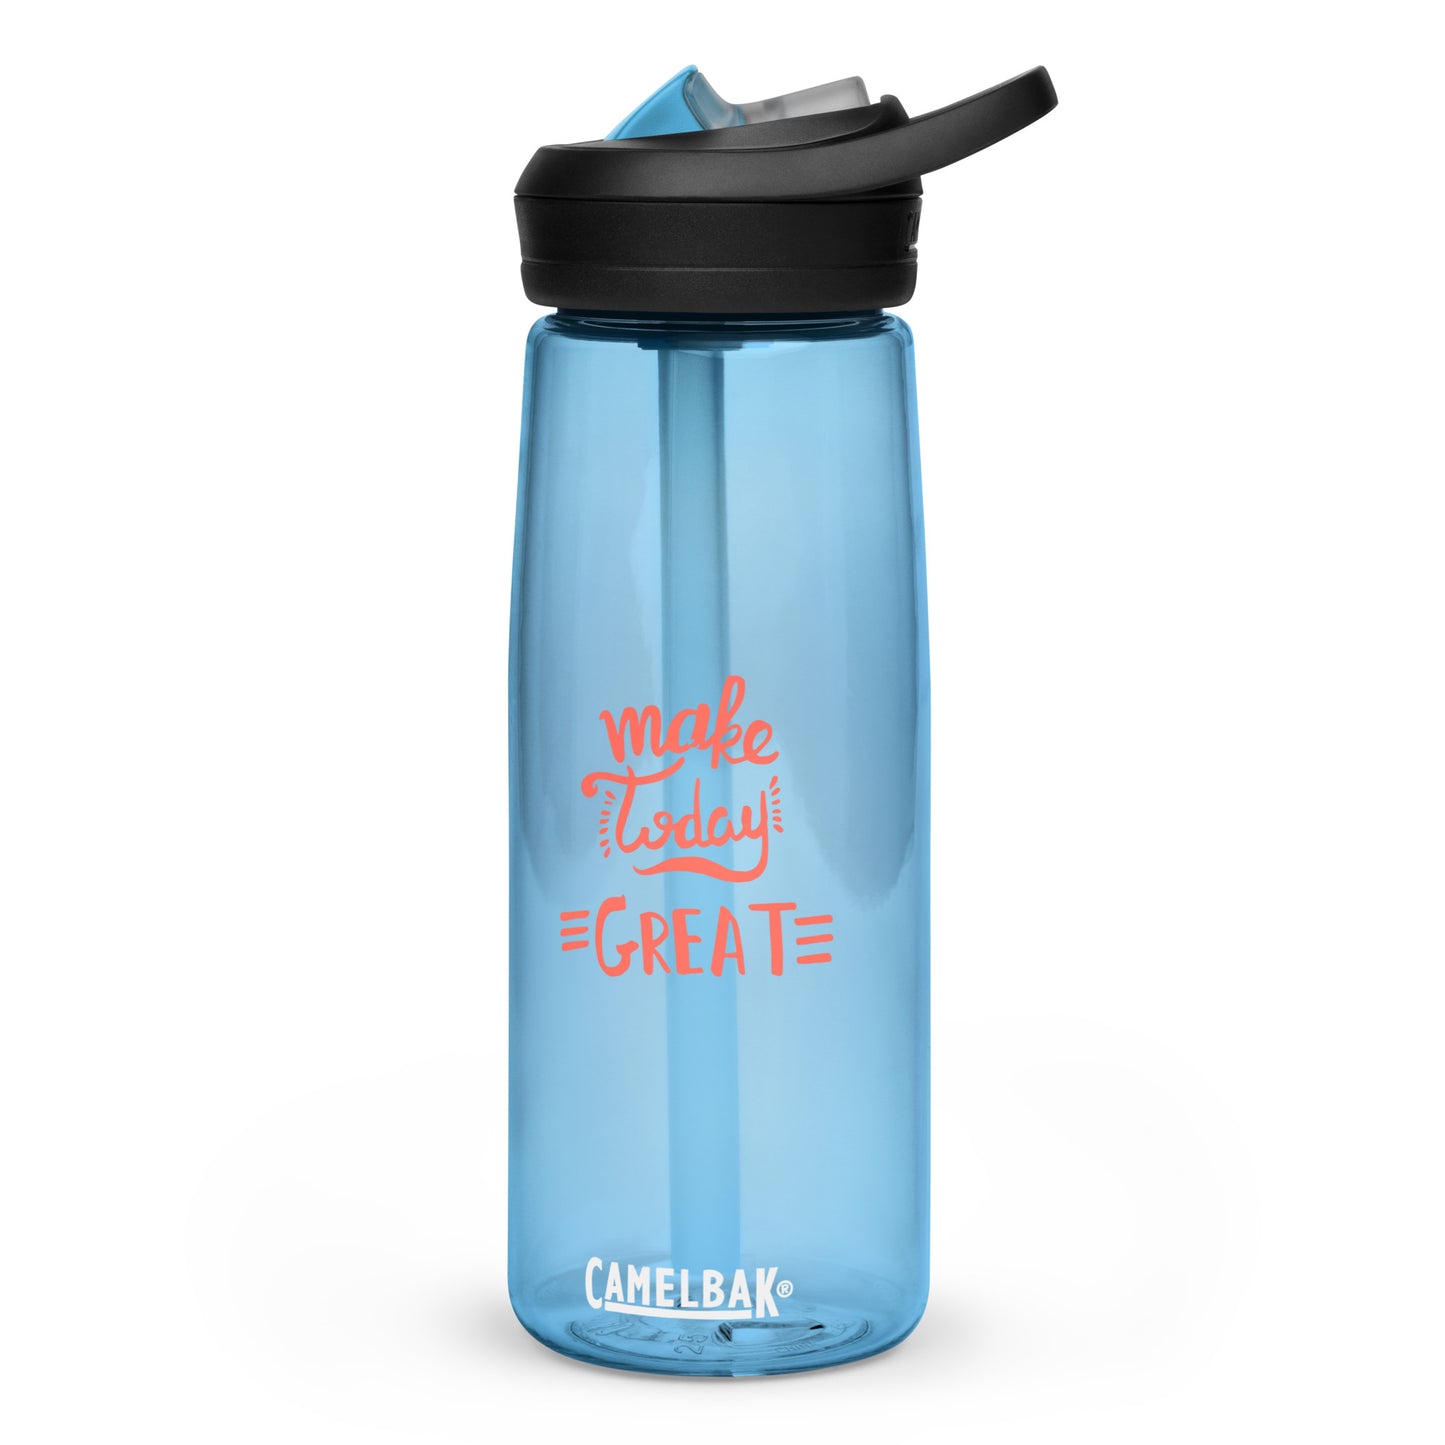 Sports water bottle Make Today Great